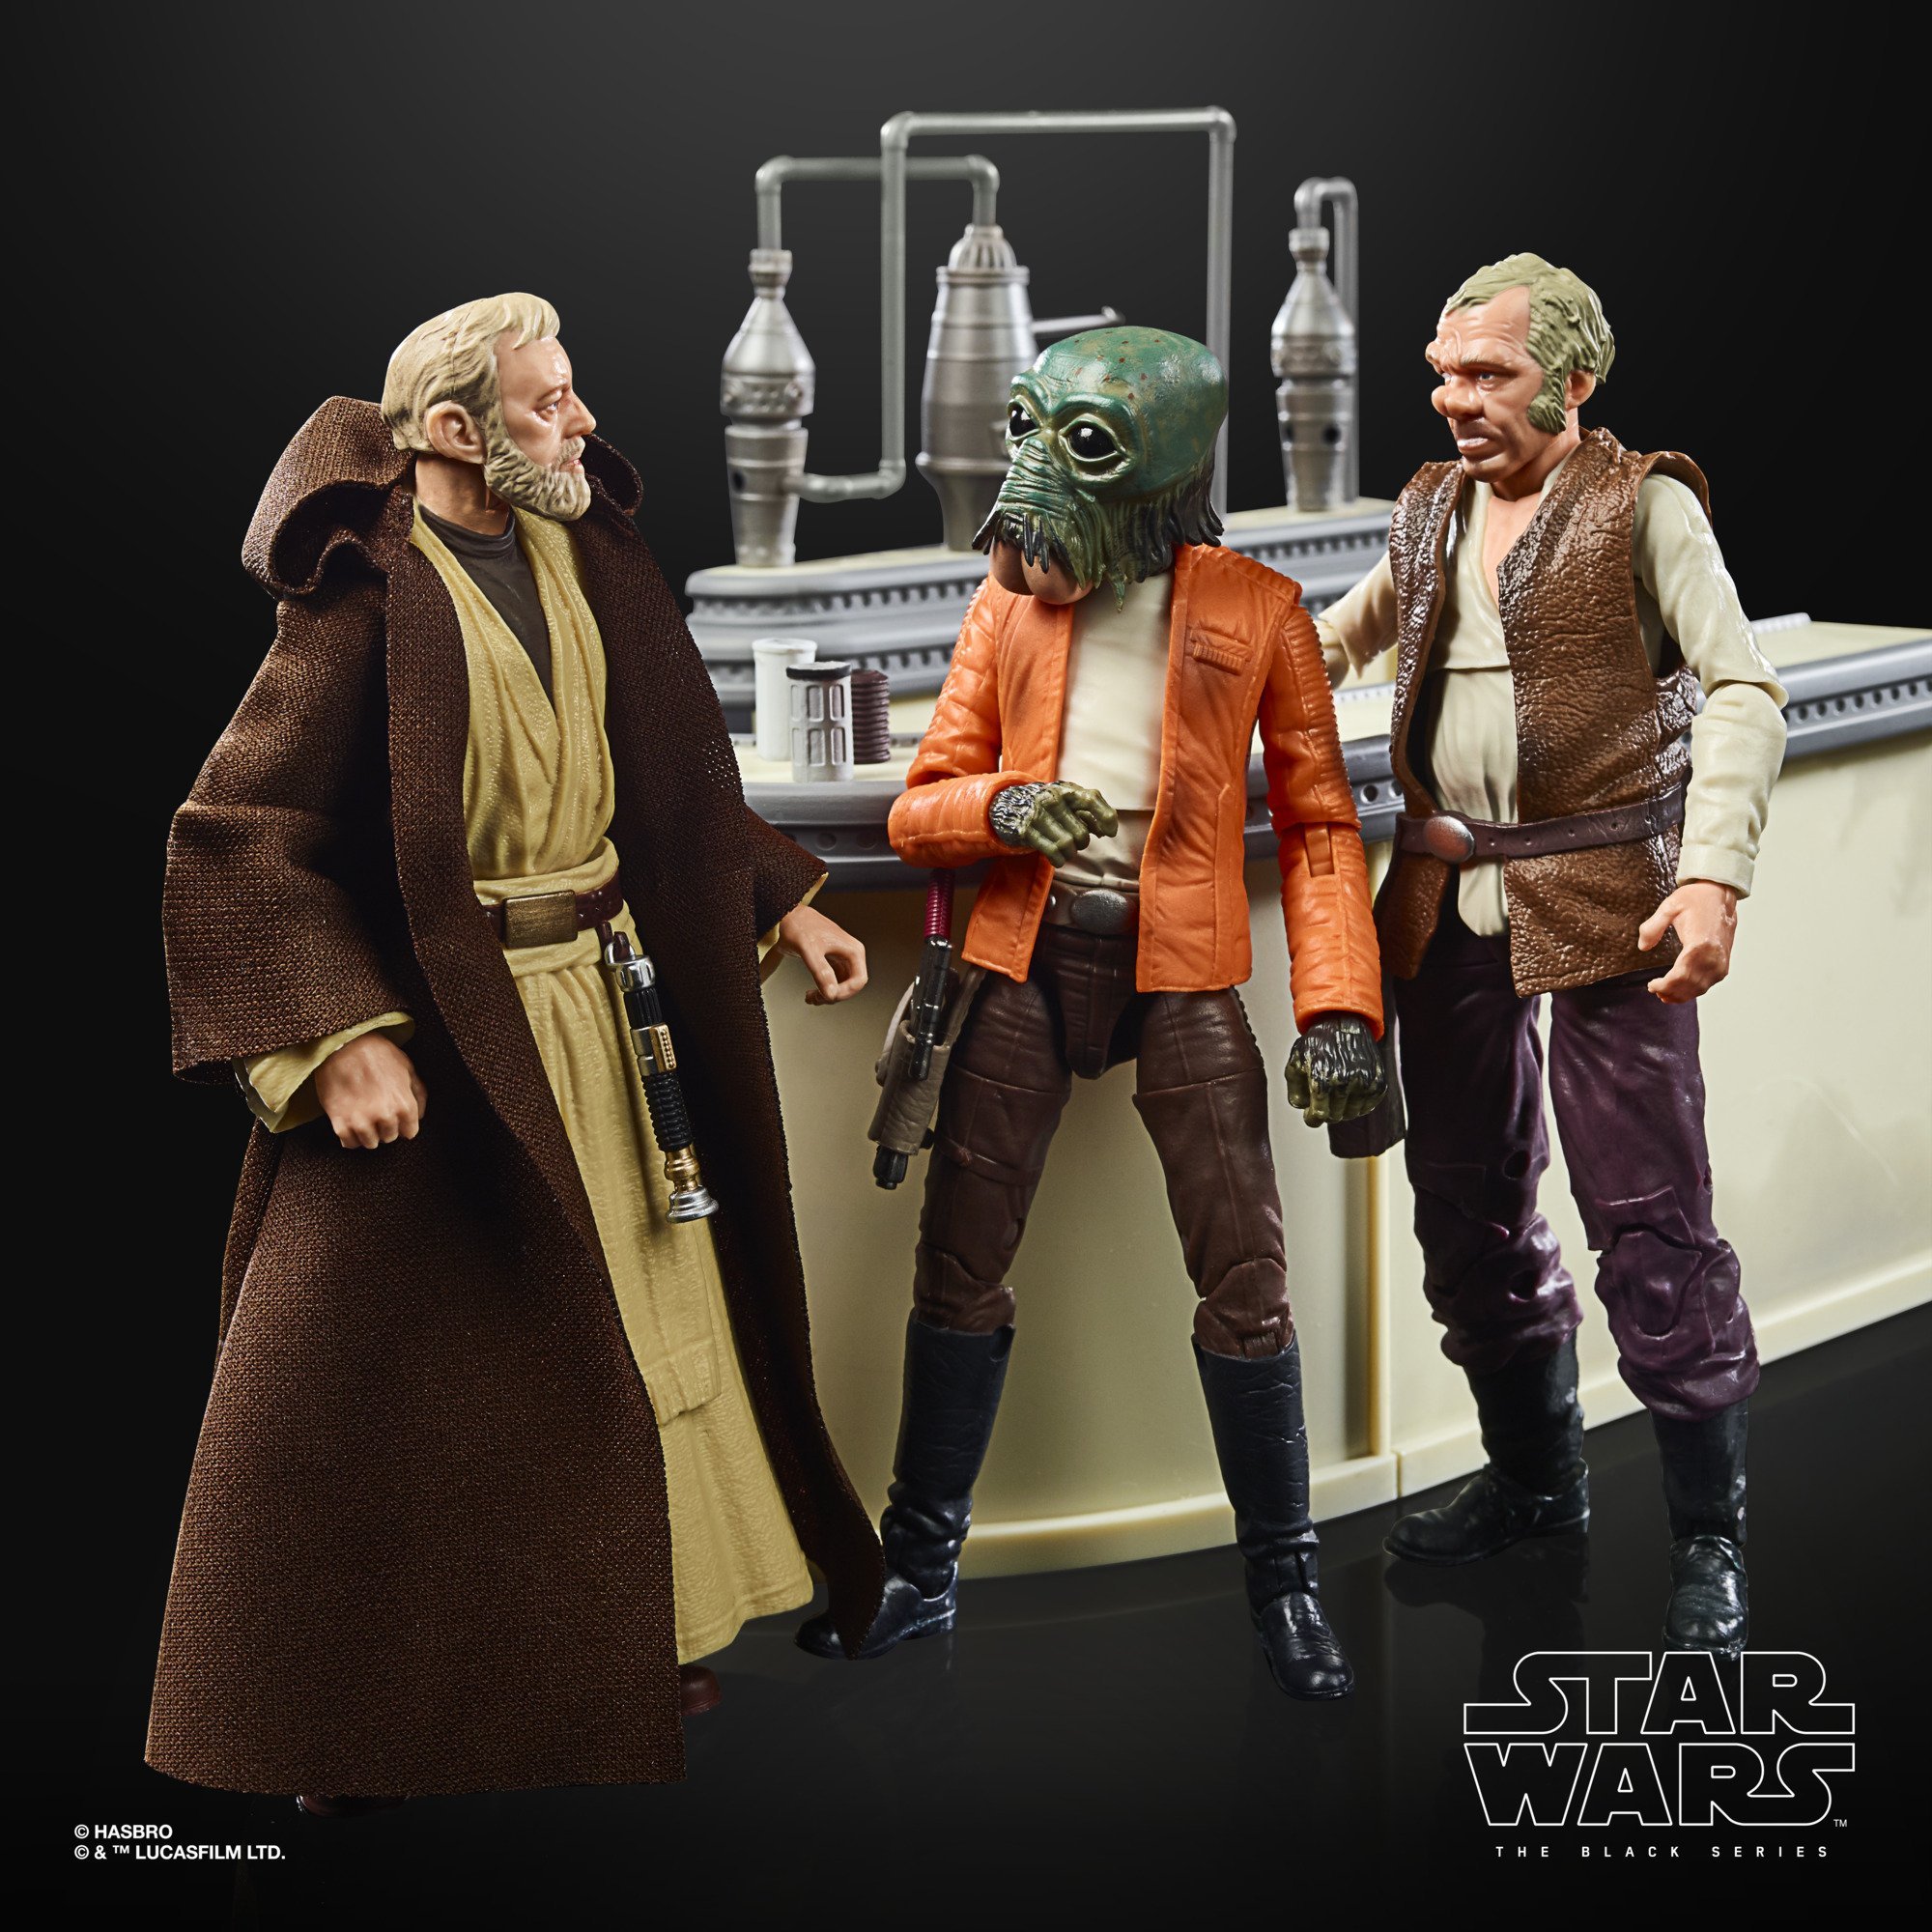 Star Wars The Black Series The Power of the Force Cantina Showdown 6-Inch Action Figure画像